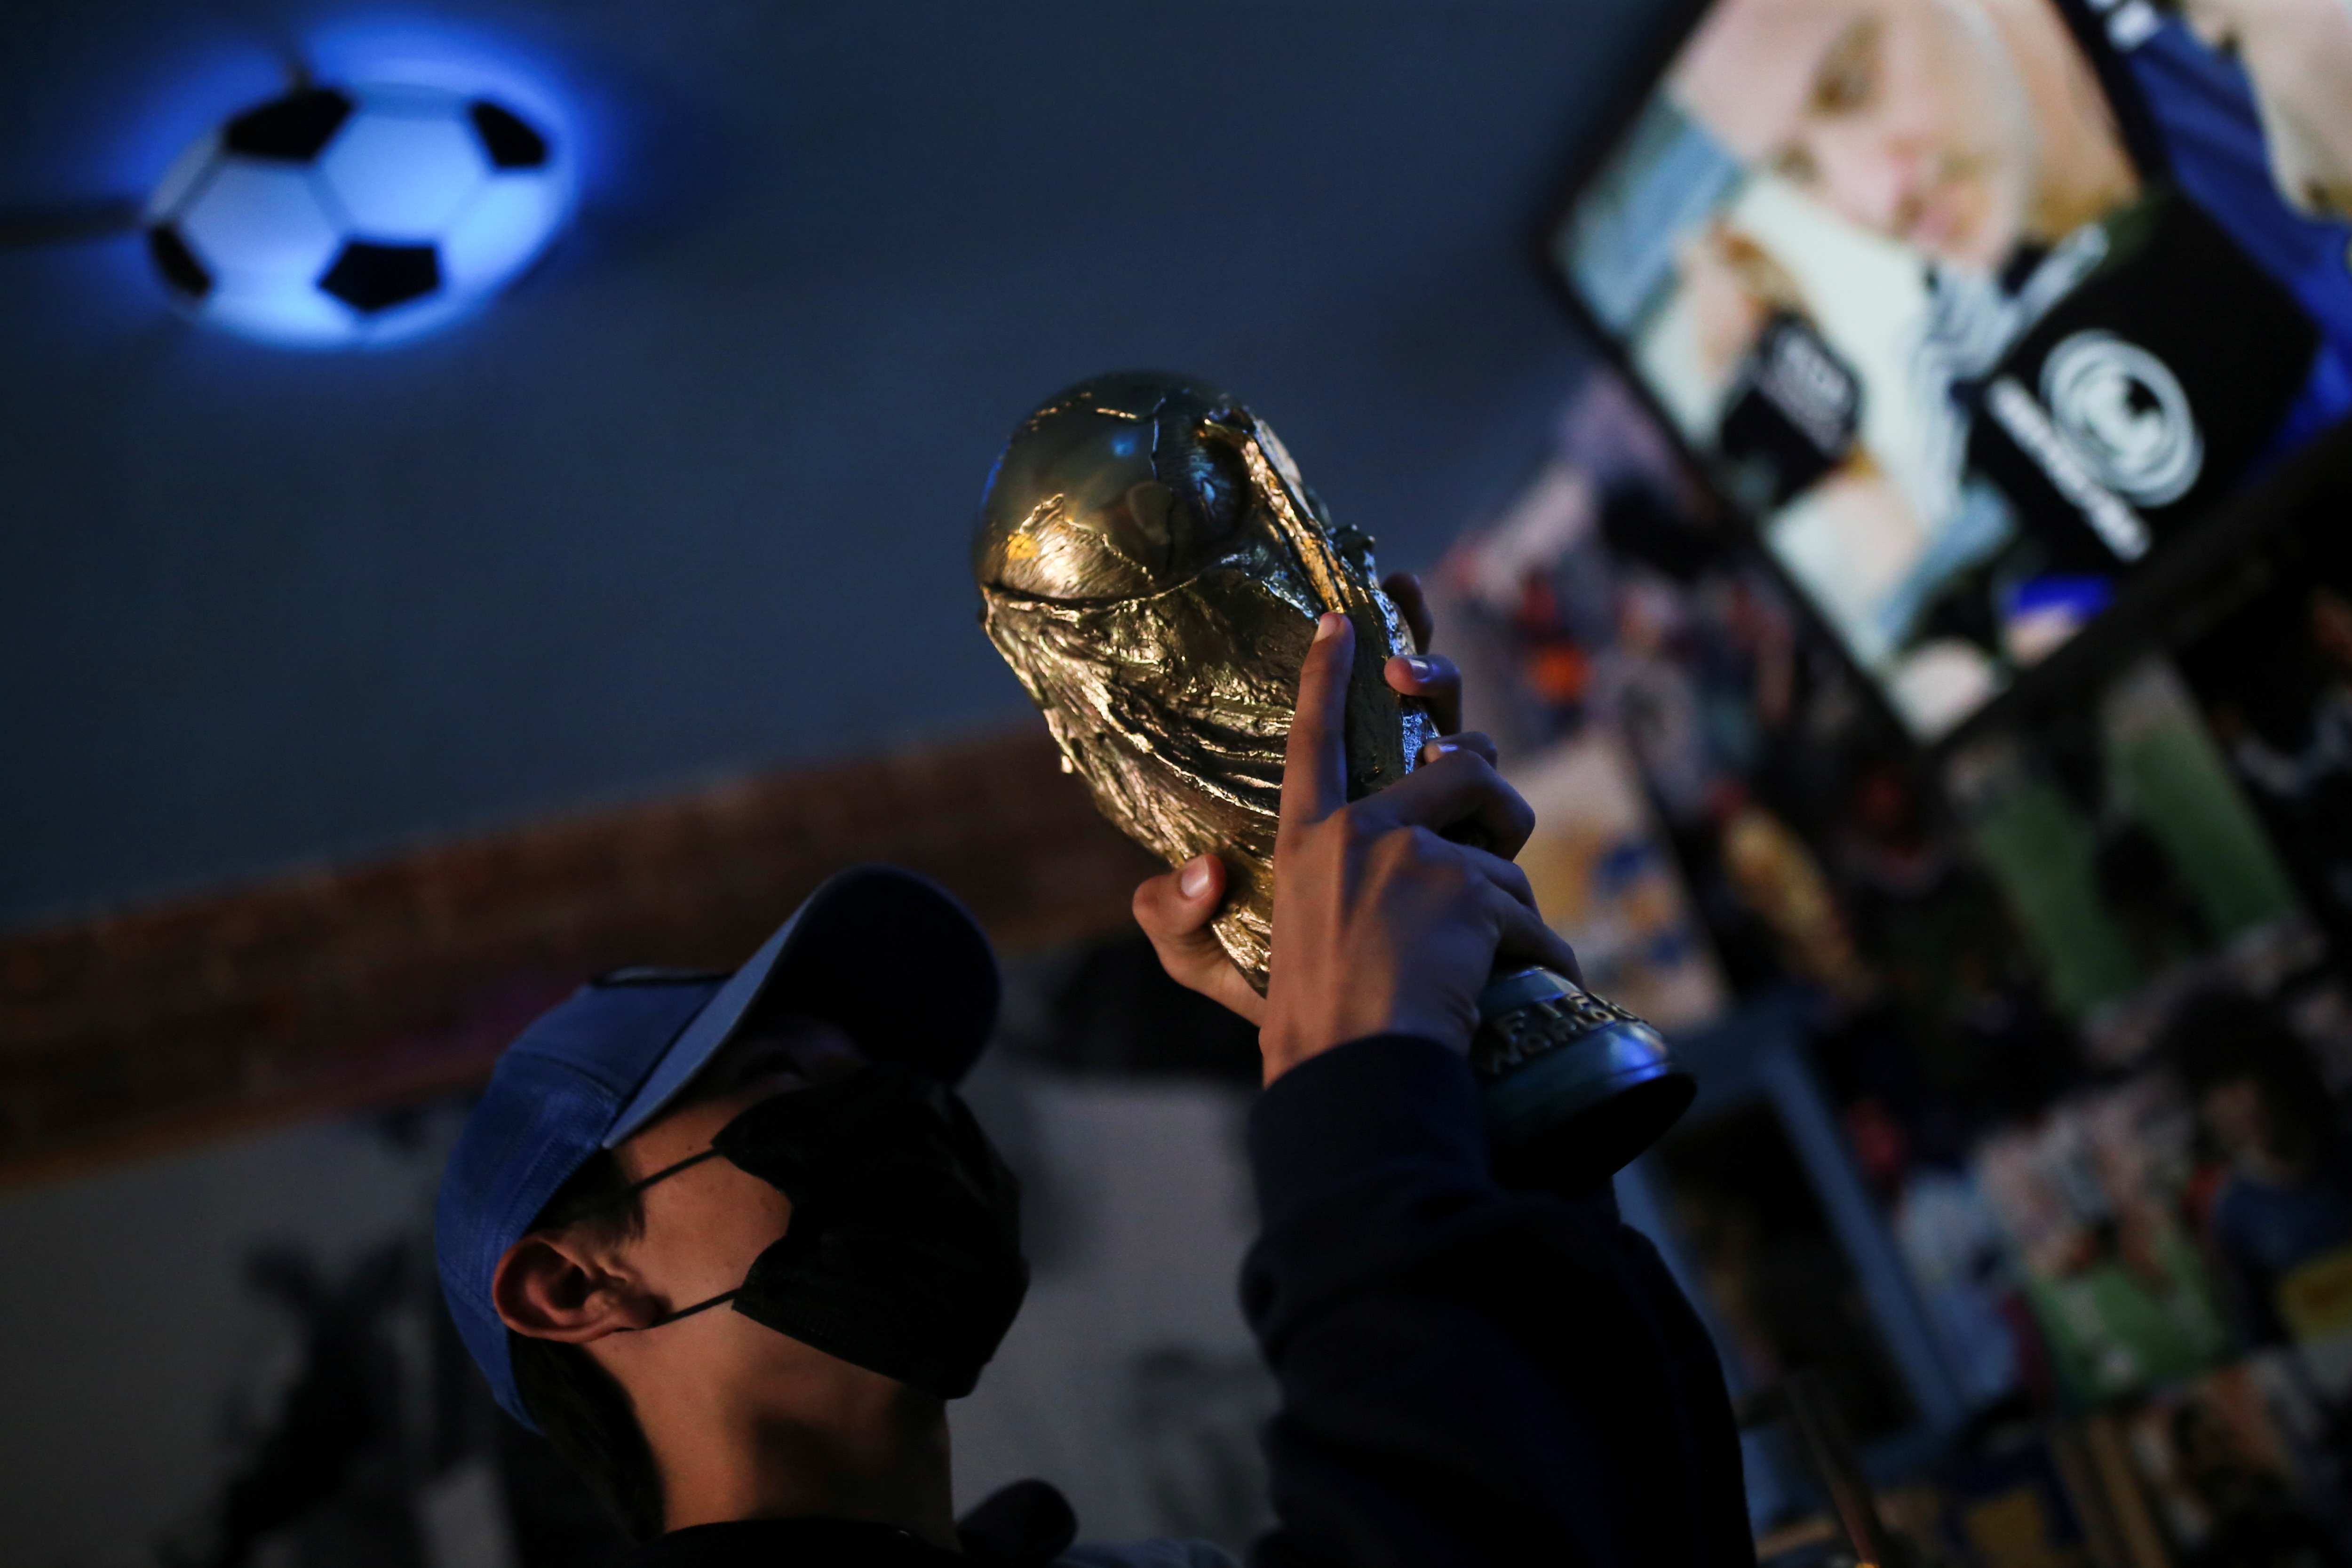 A fan holds up a replica of the World Cup trophy at the first Mexico's church in memory of soccer legend Diego Armando Maradona in San Andres Cholula